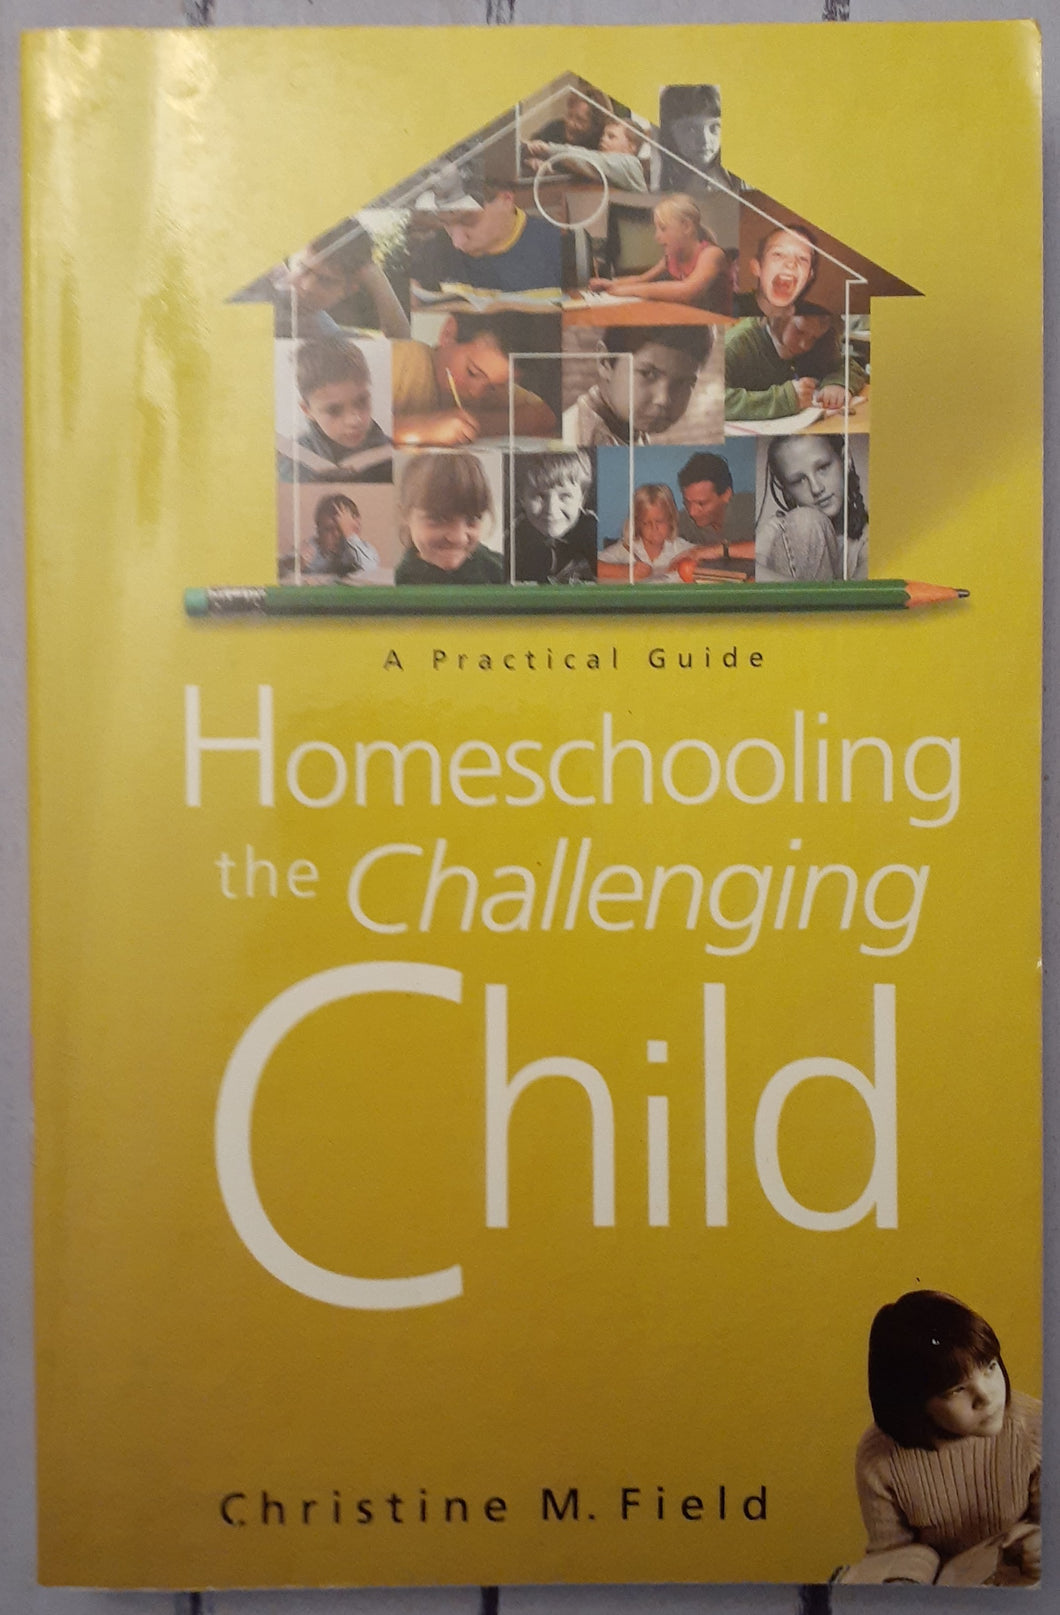 Homeschooling the Challenging Child: A Practical Guide